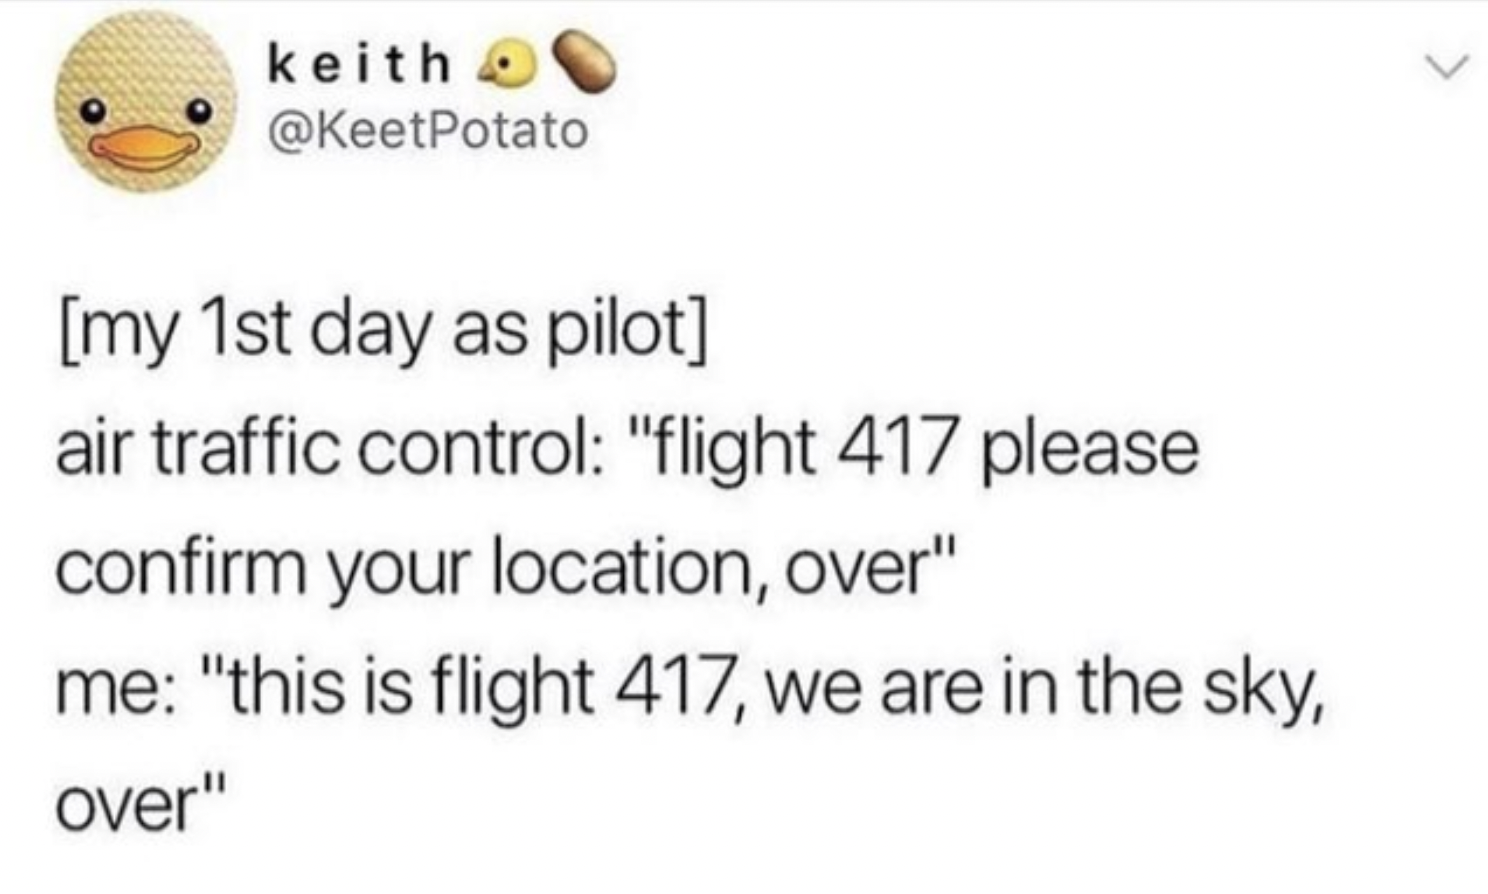 Memes That Technically Tell the Truth - funny awkward tweets - keith O my 1st day as pilot air traffic control